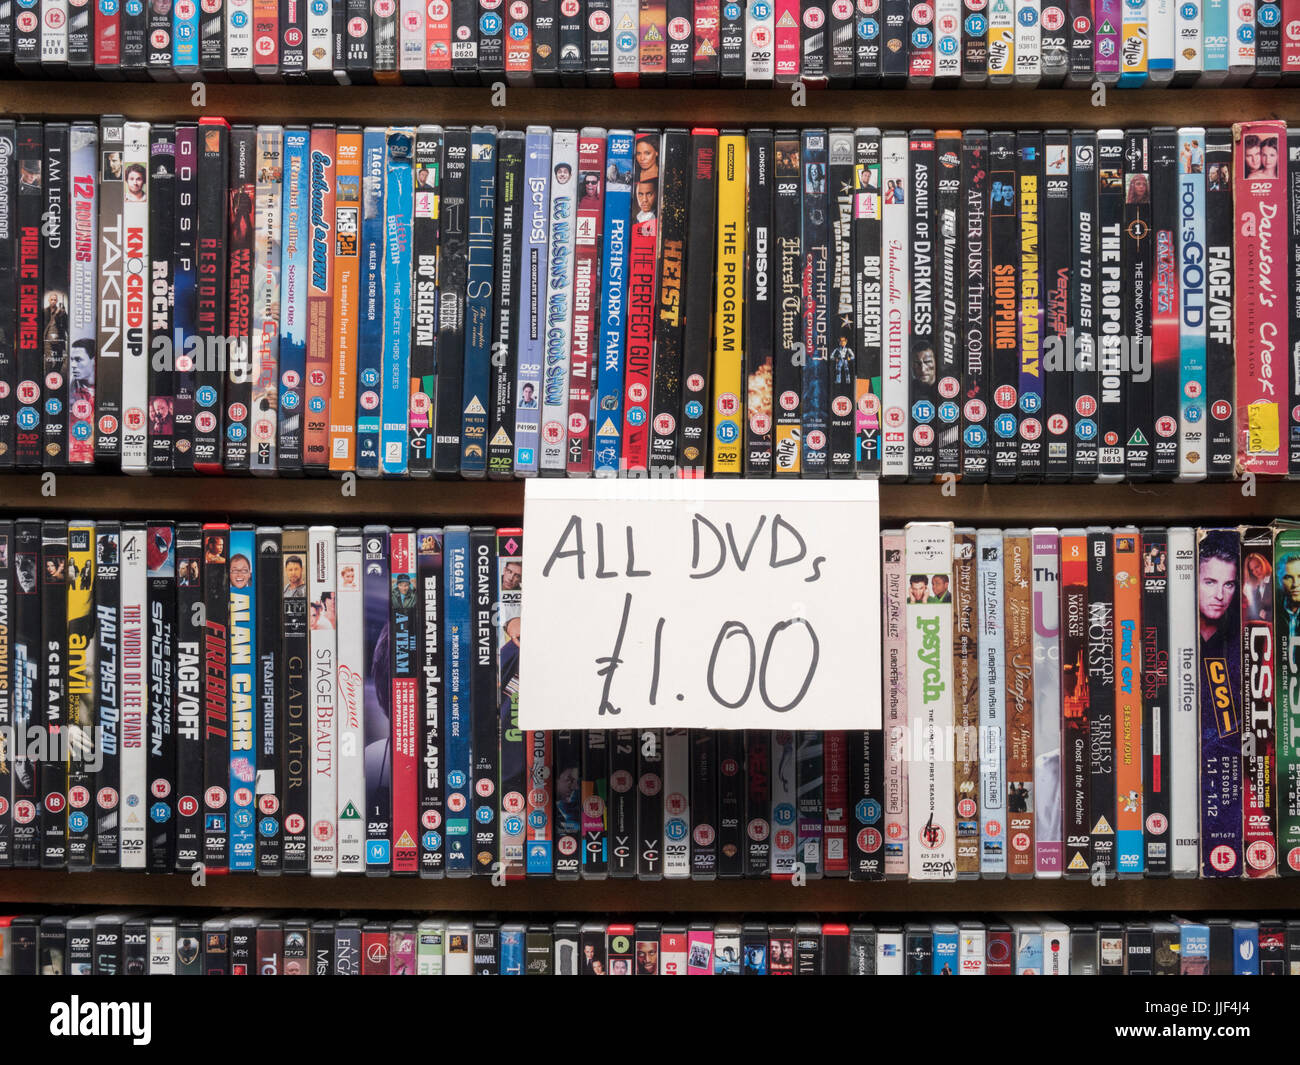 A close up of DVDs for sale on a market stall in the UK Stock Photo